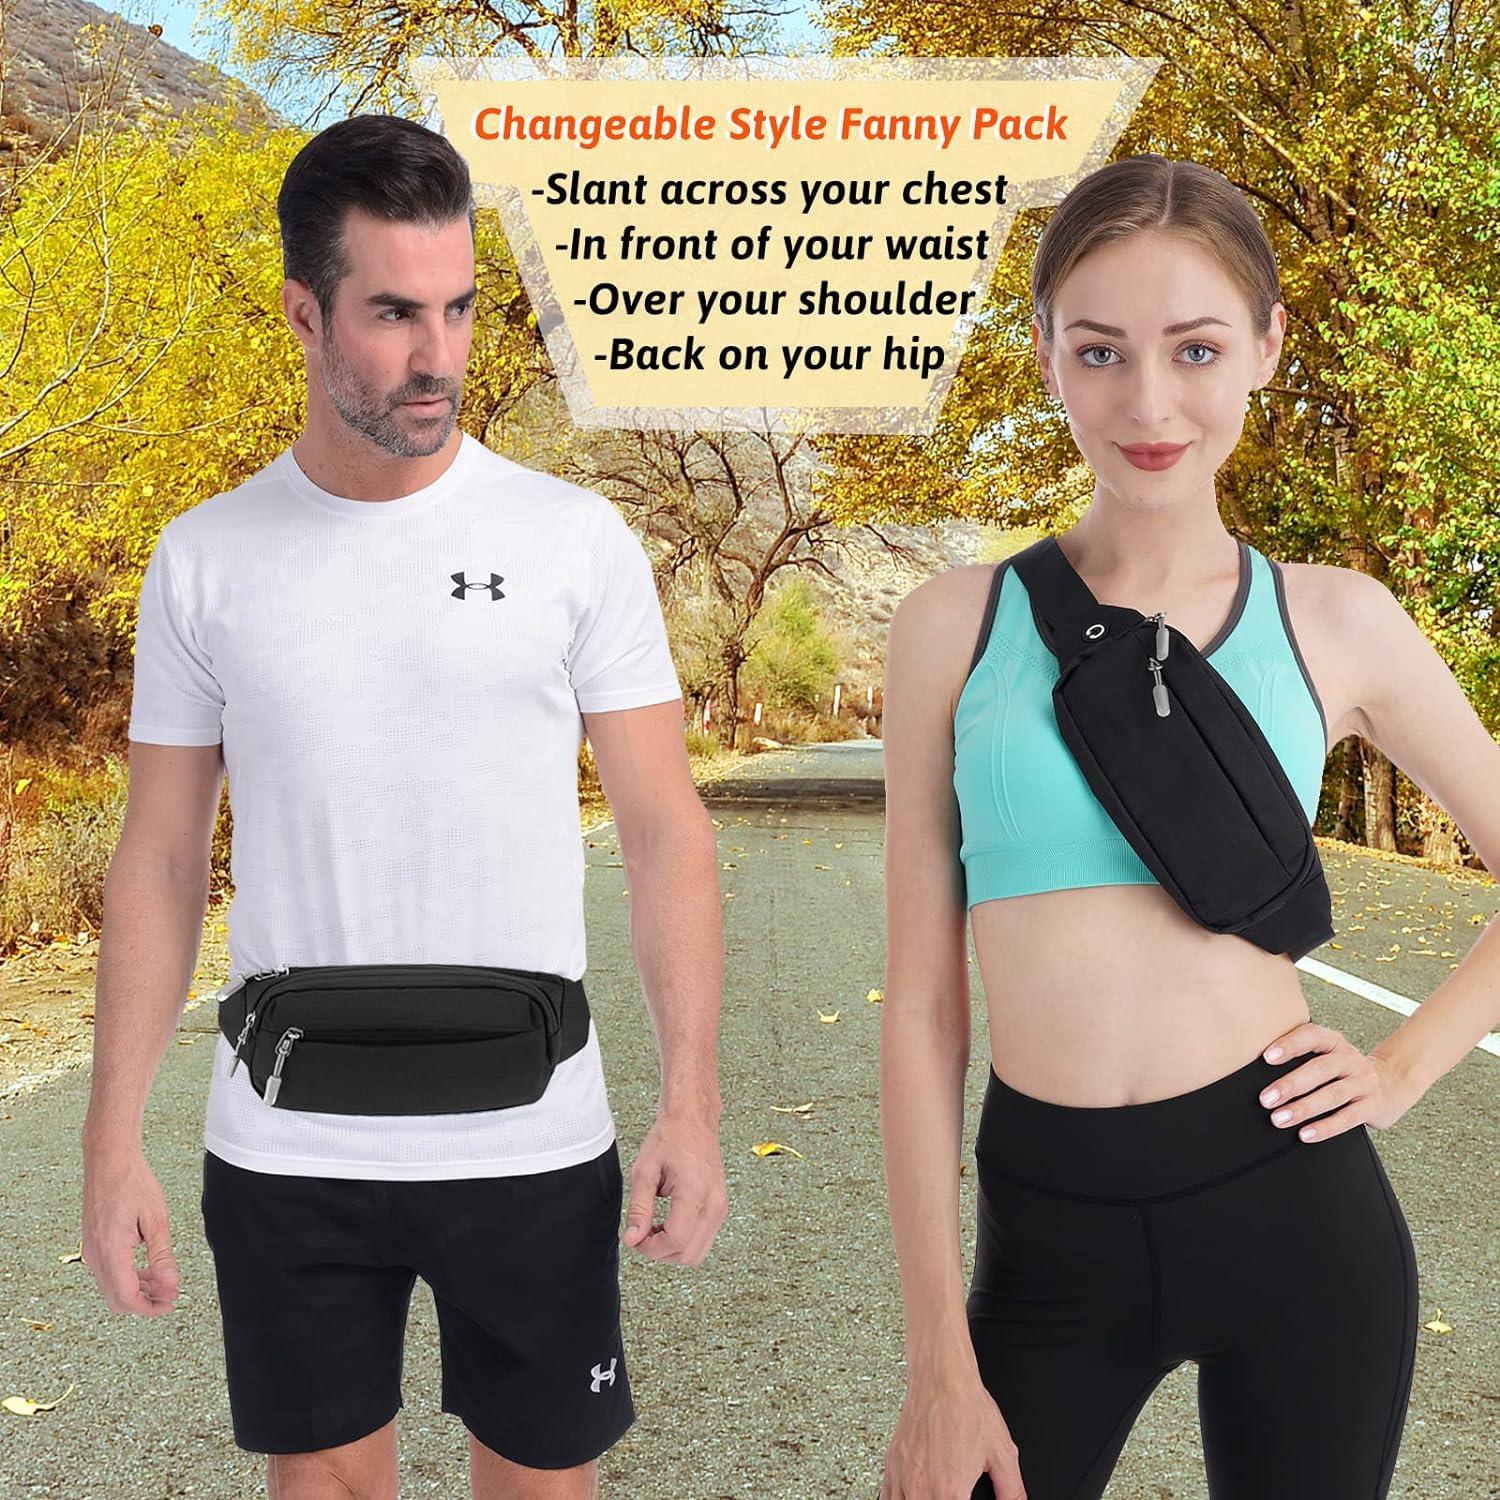  Premium Quality, Unisex Fanny Pack Adjustable Belt, Great  Travel Fanny Packs for Women and Men, Waist Pouch for Workout, Running,  Hiking, Fashion